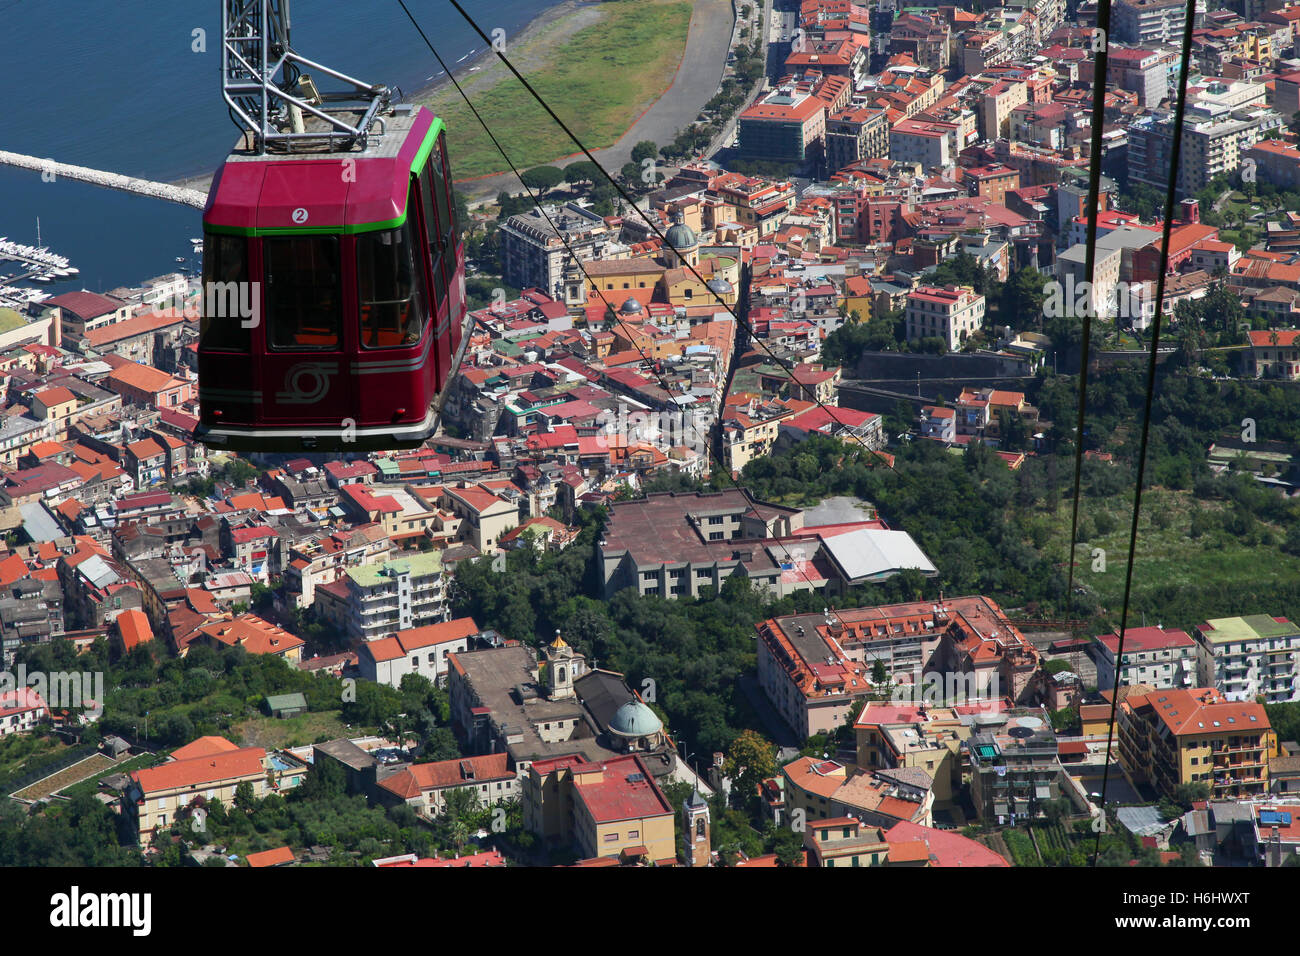 Red purple cable car ride near to Sorrento Italy, makes you think just how good it Italian engineering safety records etc. Stock Photo